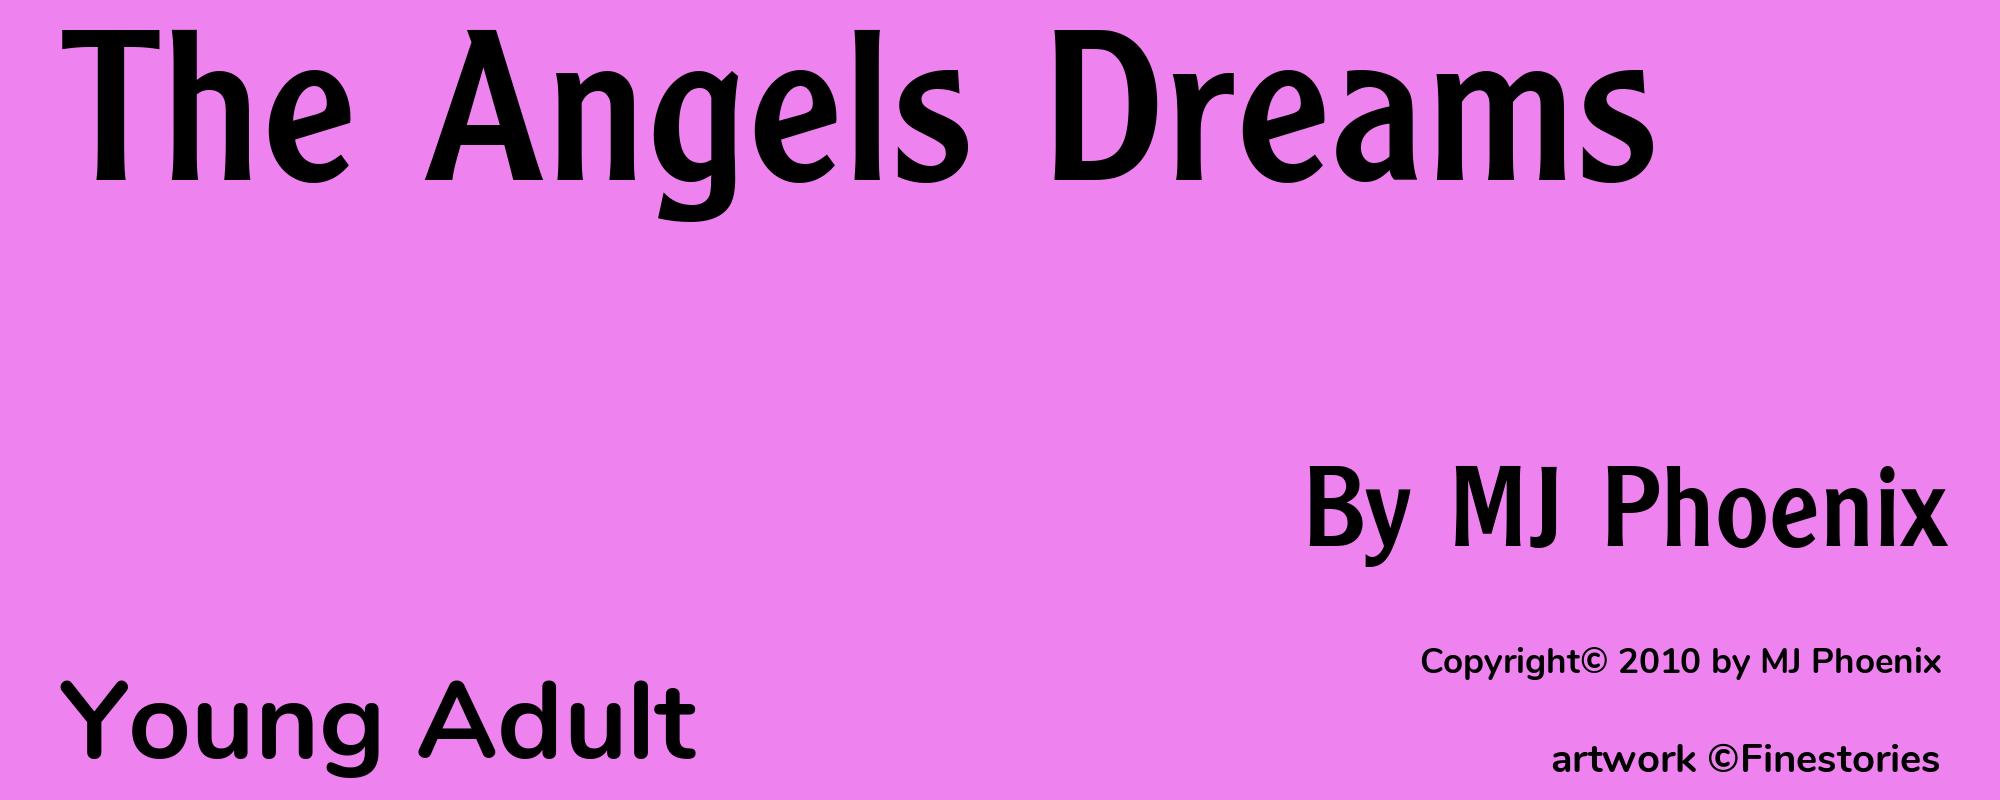 The Angels Dreams - Cover